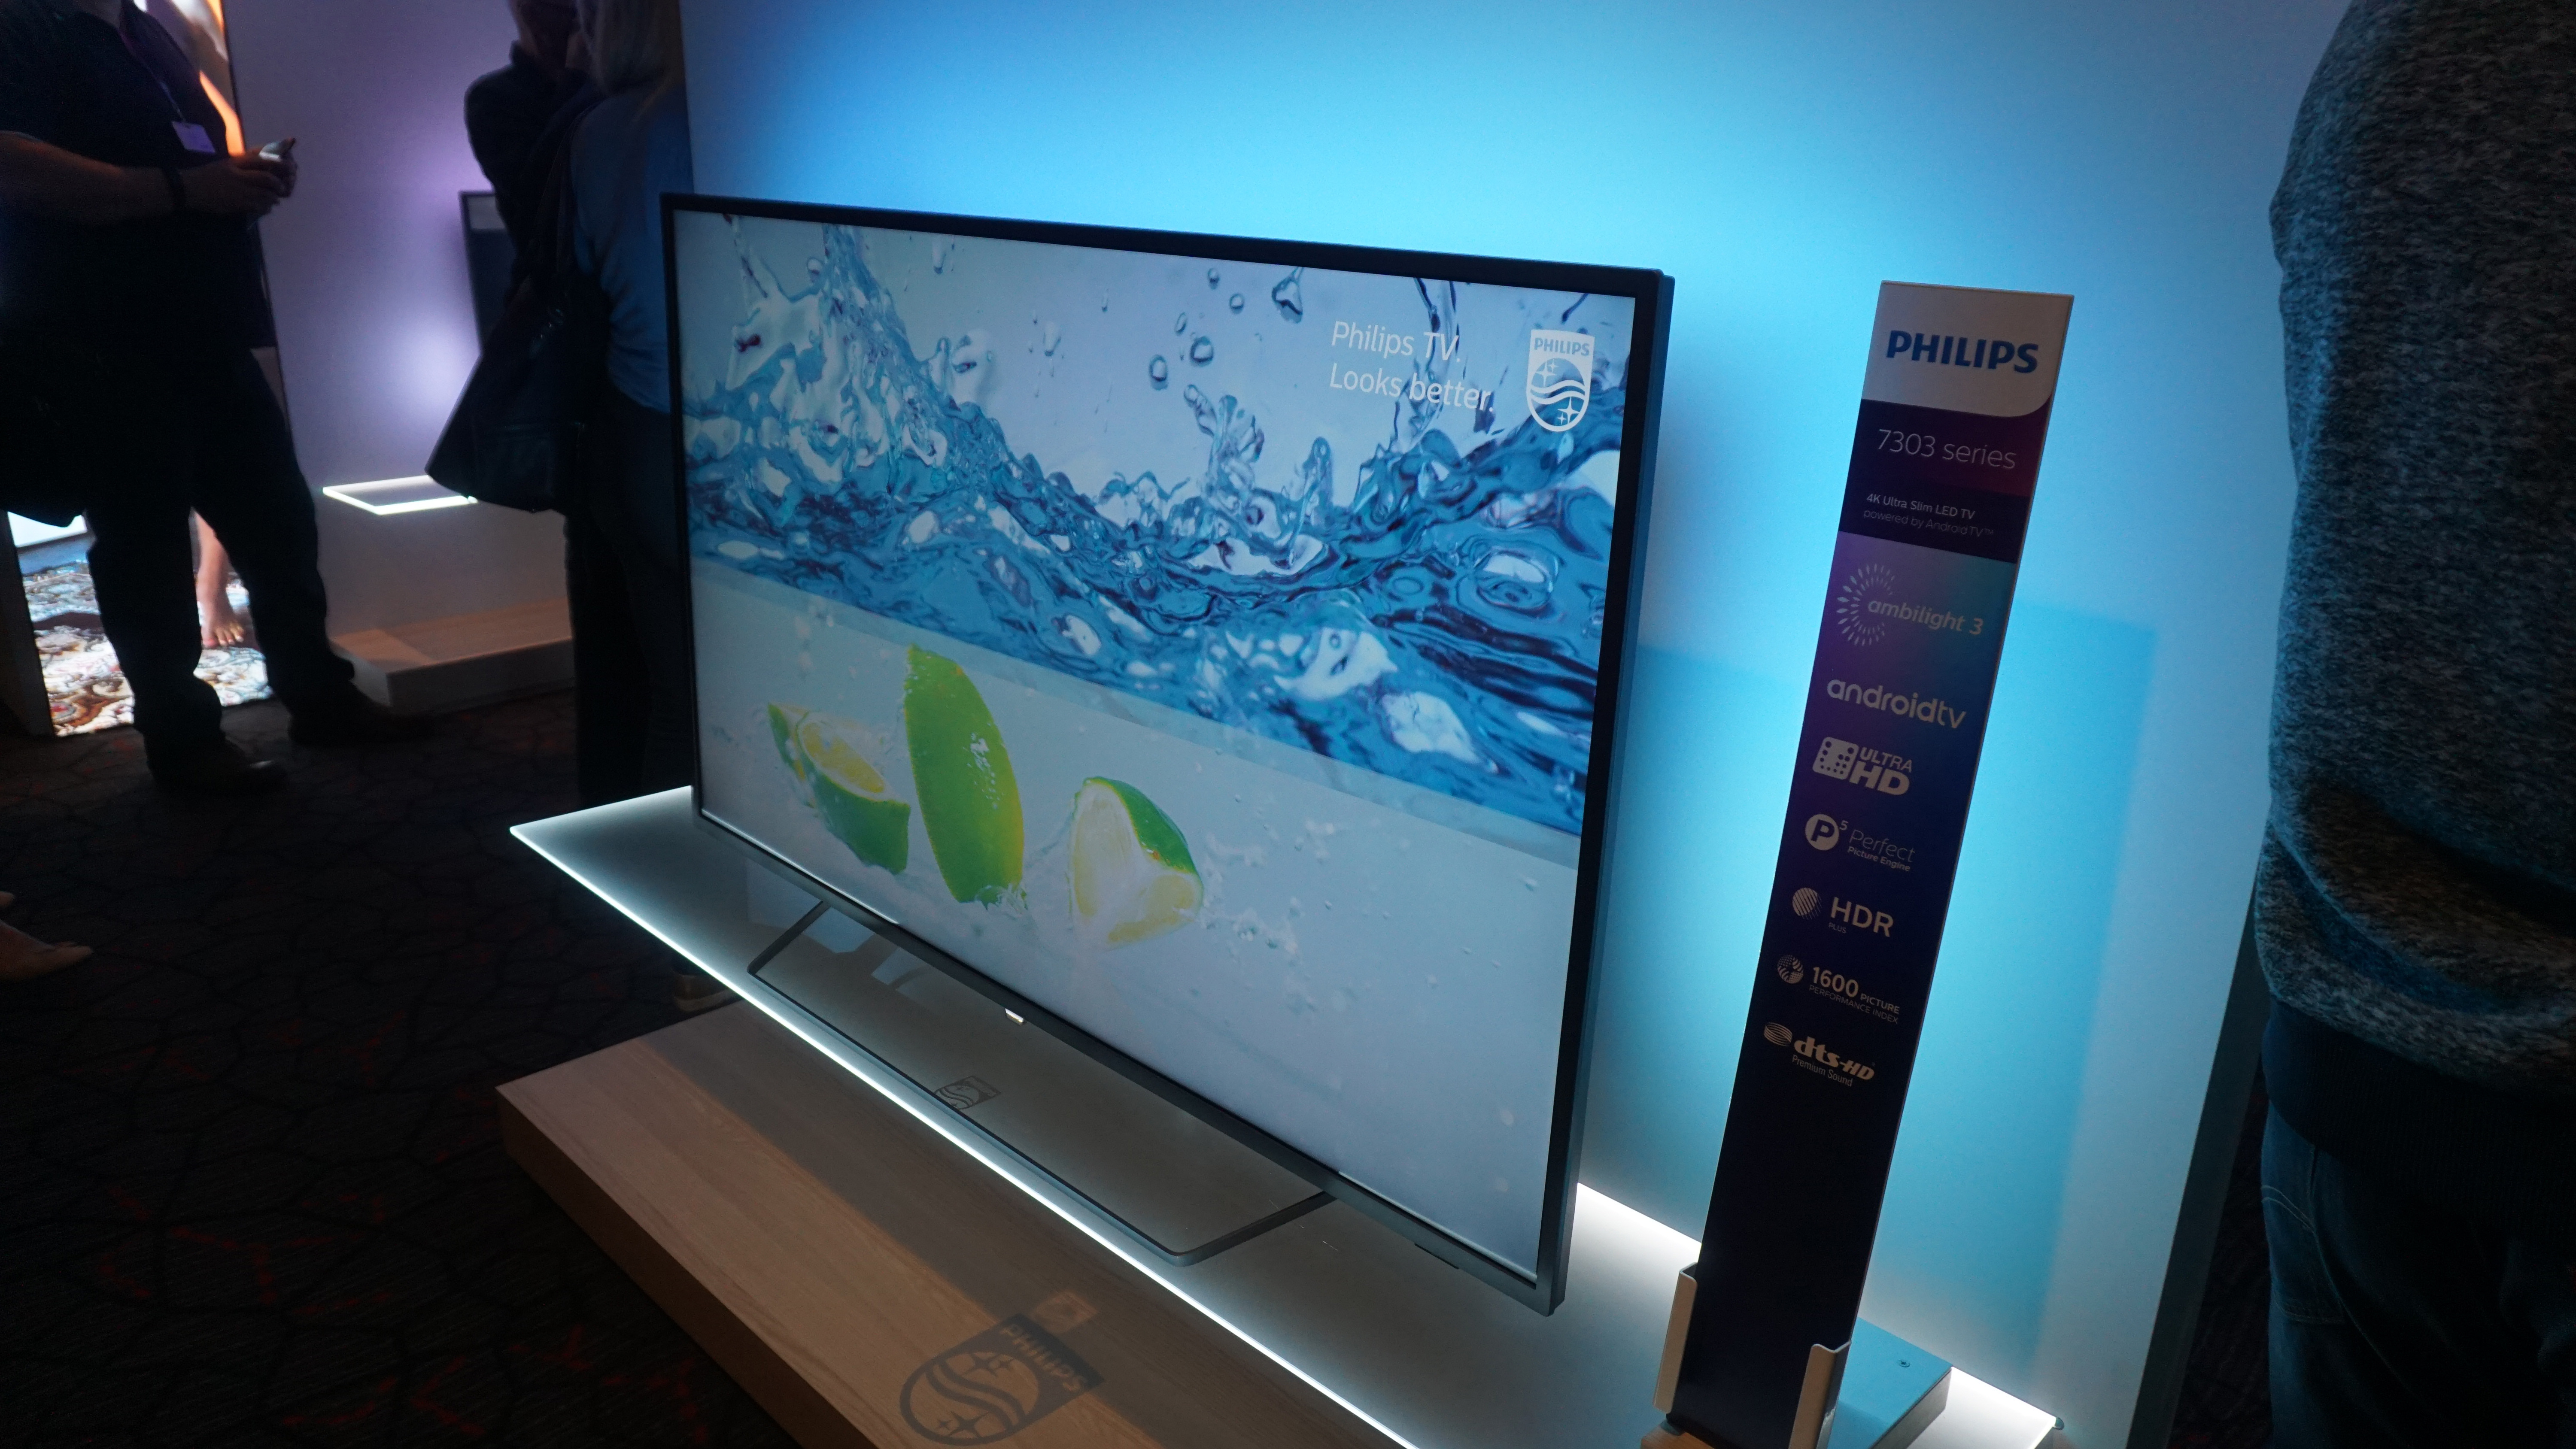 Premonition banana particle Hands on: Philips 7303 Series 4K HDR TV review | TechRadar